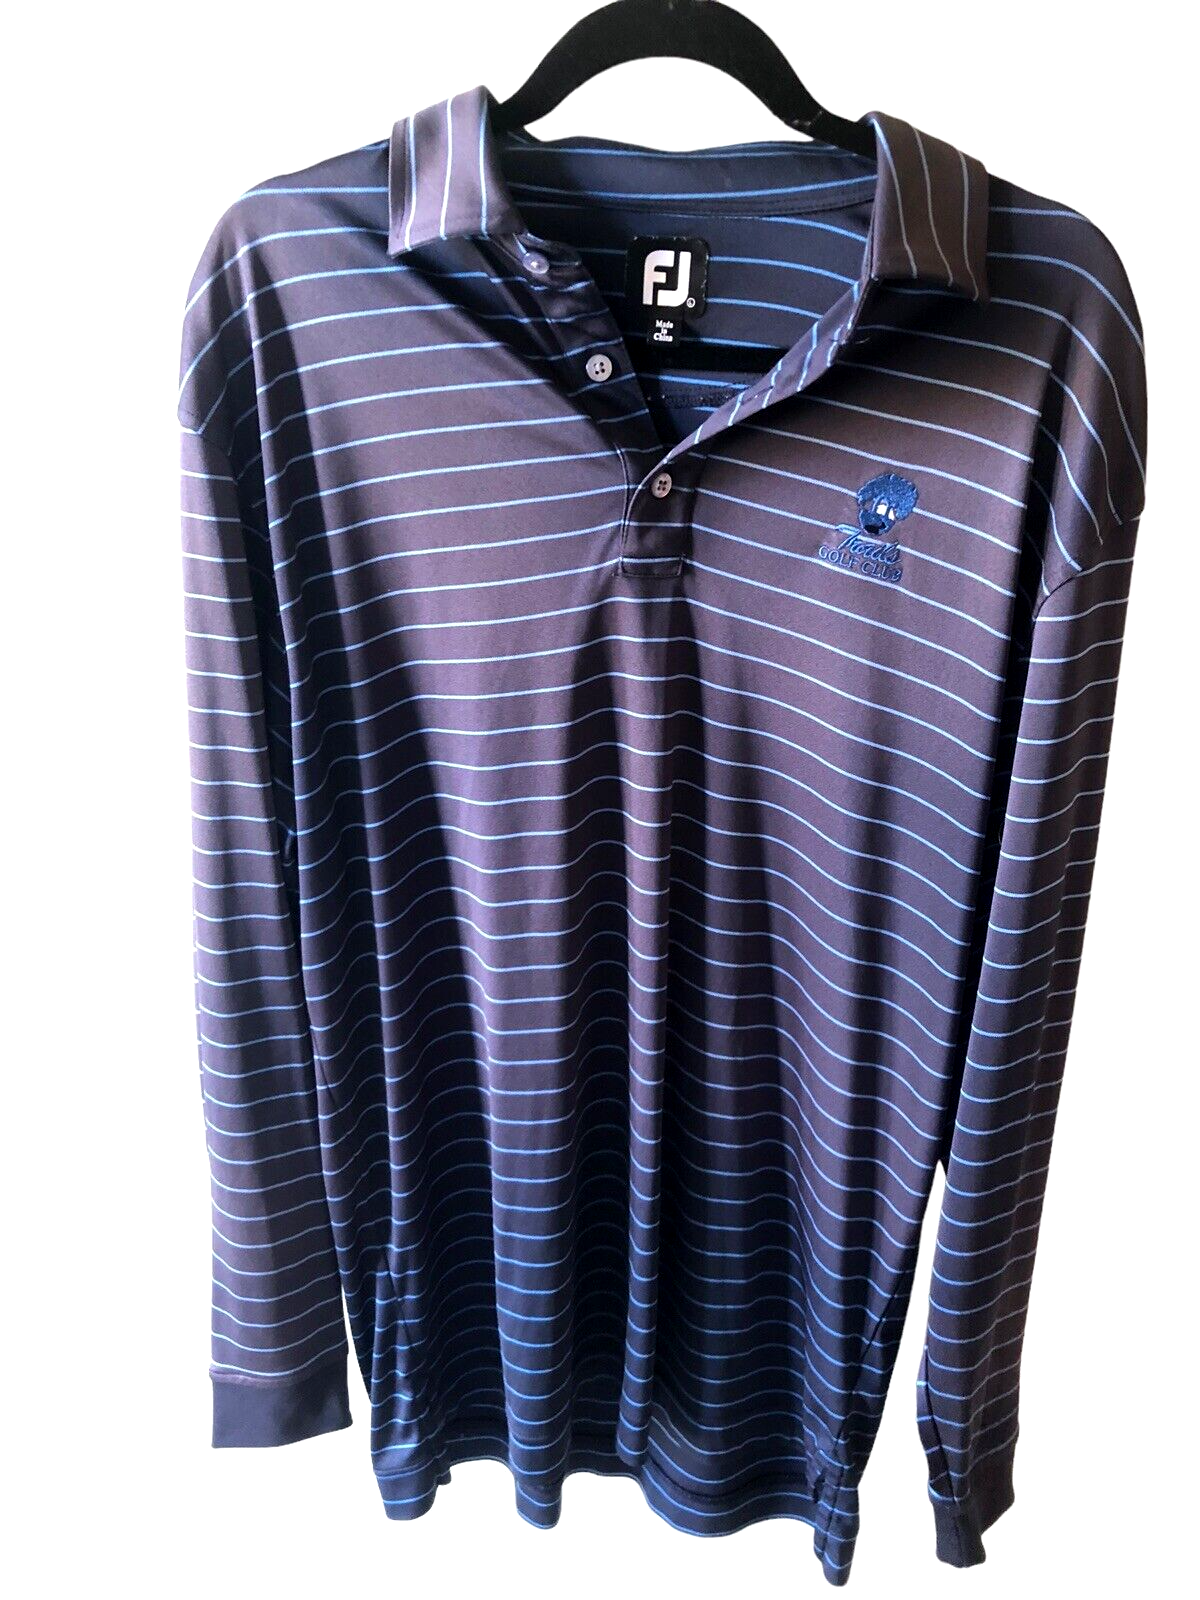 Primary image for Footjoy Polo Shirt Size Large Mens Blue Stripe Knit Pullover Golf Trails Club